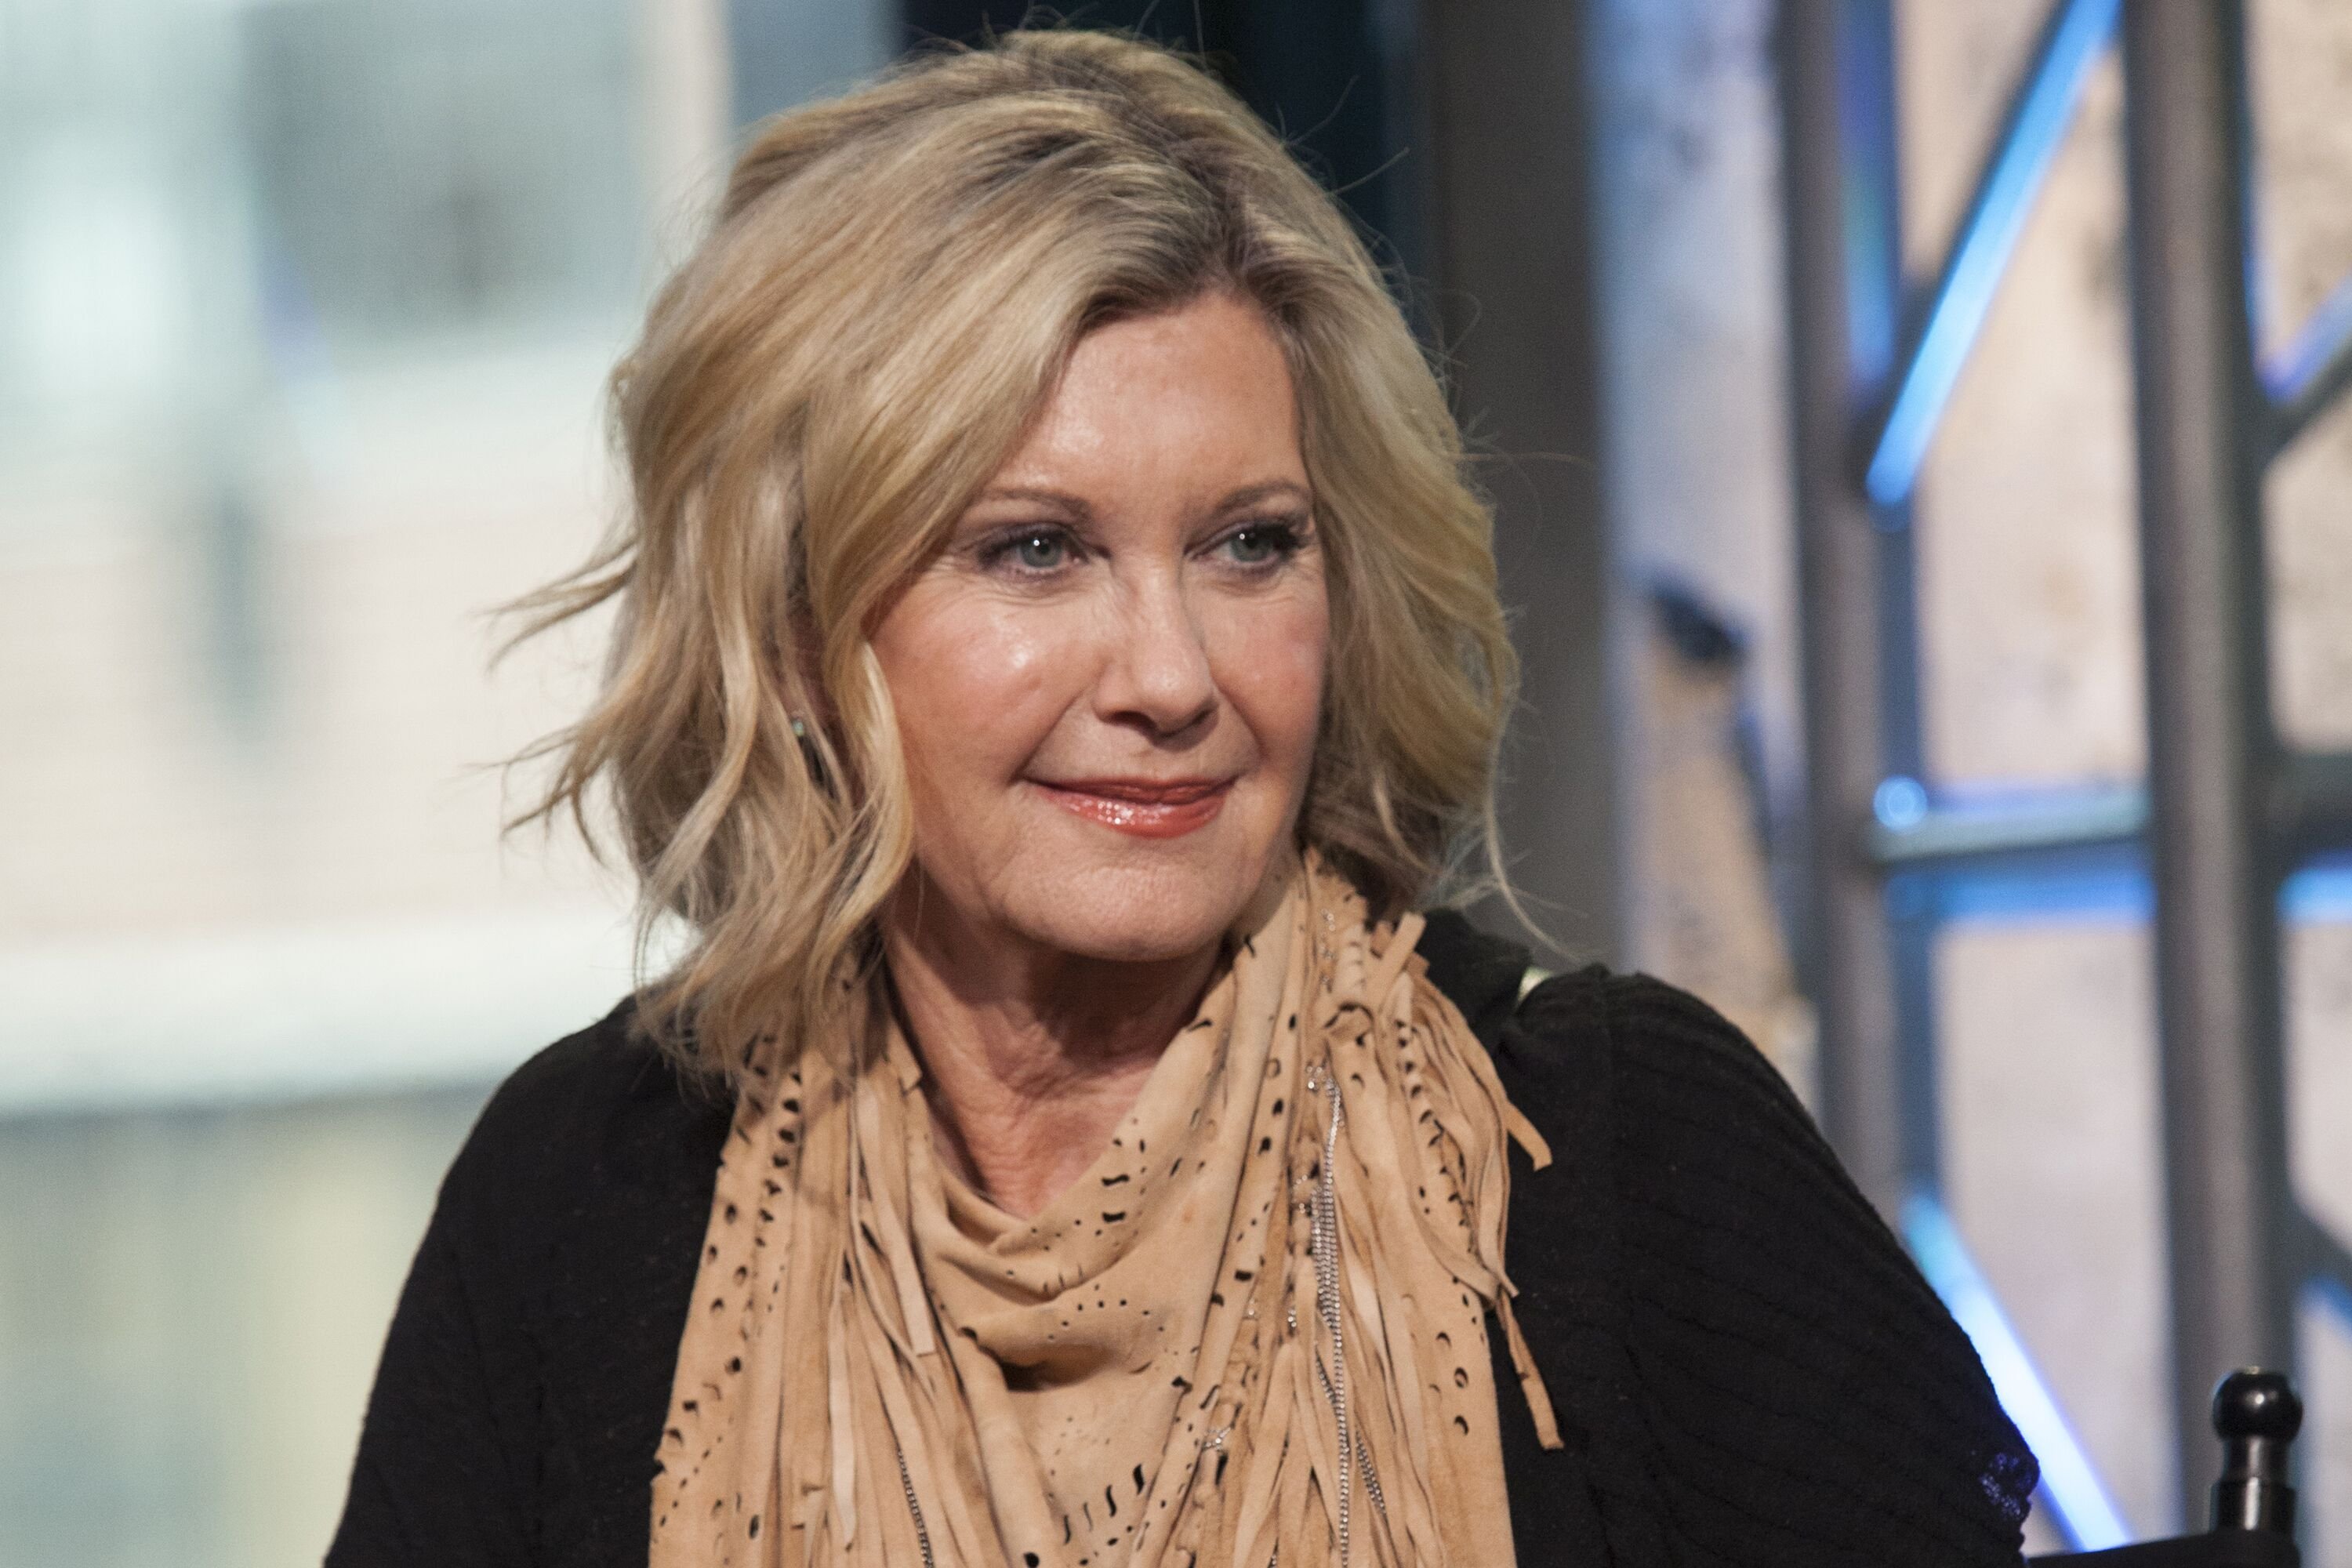 Olivia Newton-John attends The Build Series Presents Olivia Newton-John, Amy Sky And Beth Nielsen Chapman Discussing The New Project "LIV ON" at AOL HQ in New York City | Photo: Getty Images